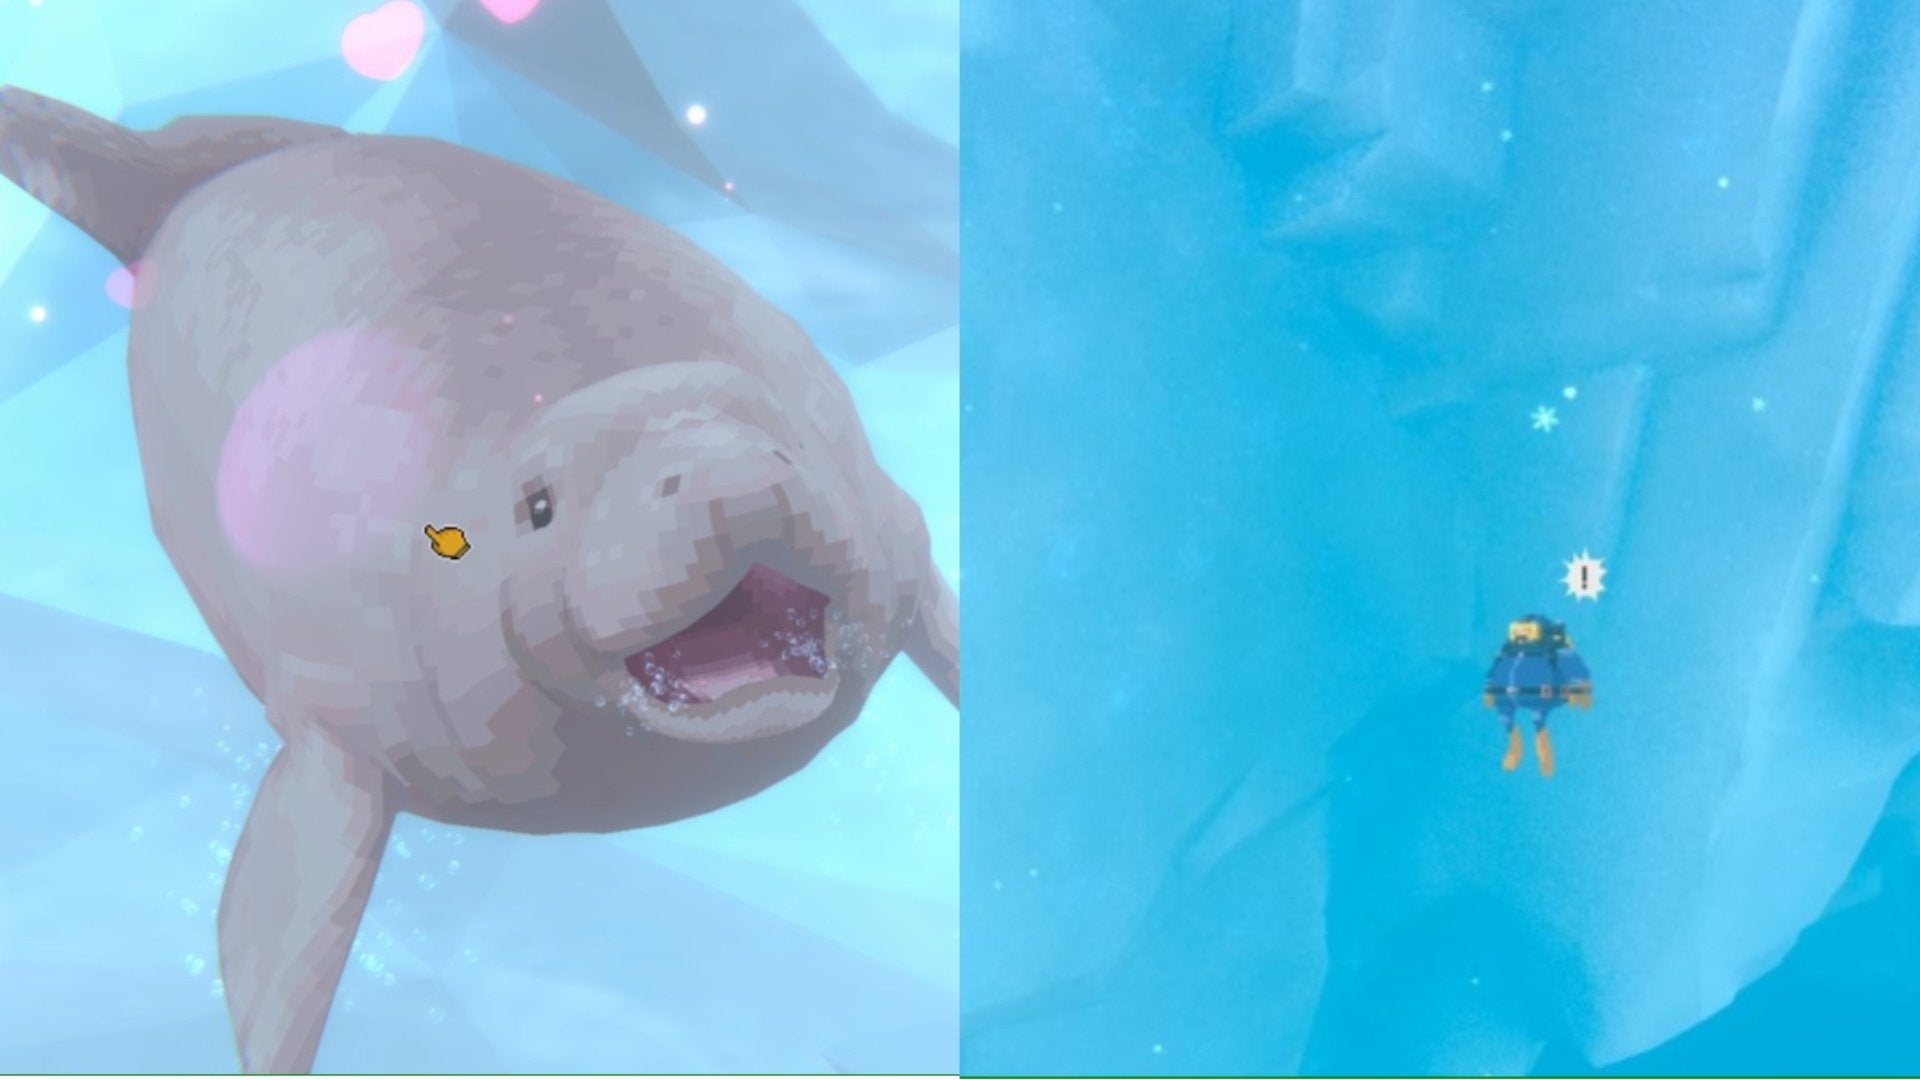 To the left is the Baby Manatee petting minigame, to the right is Dave in the Glacial Area.